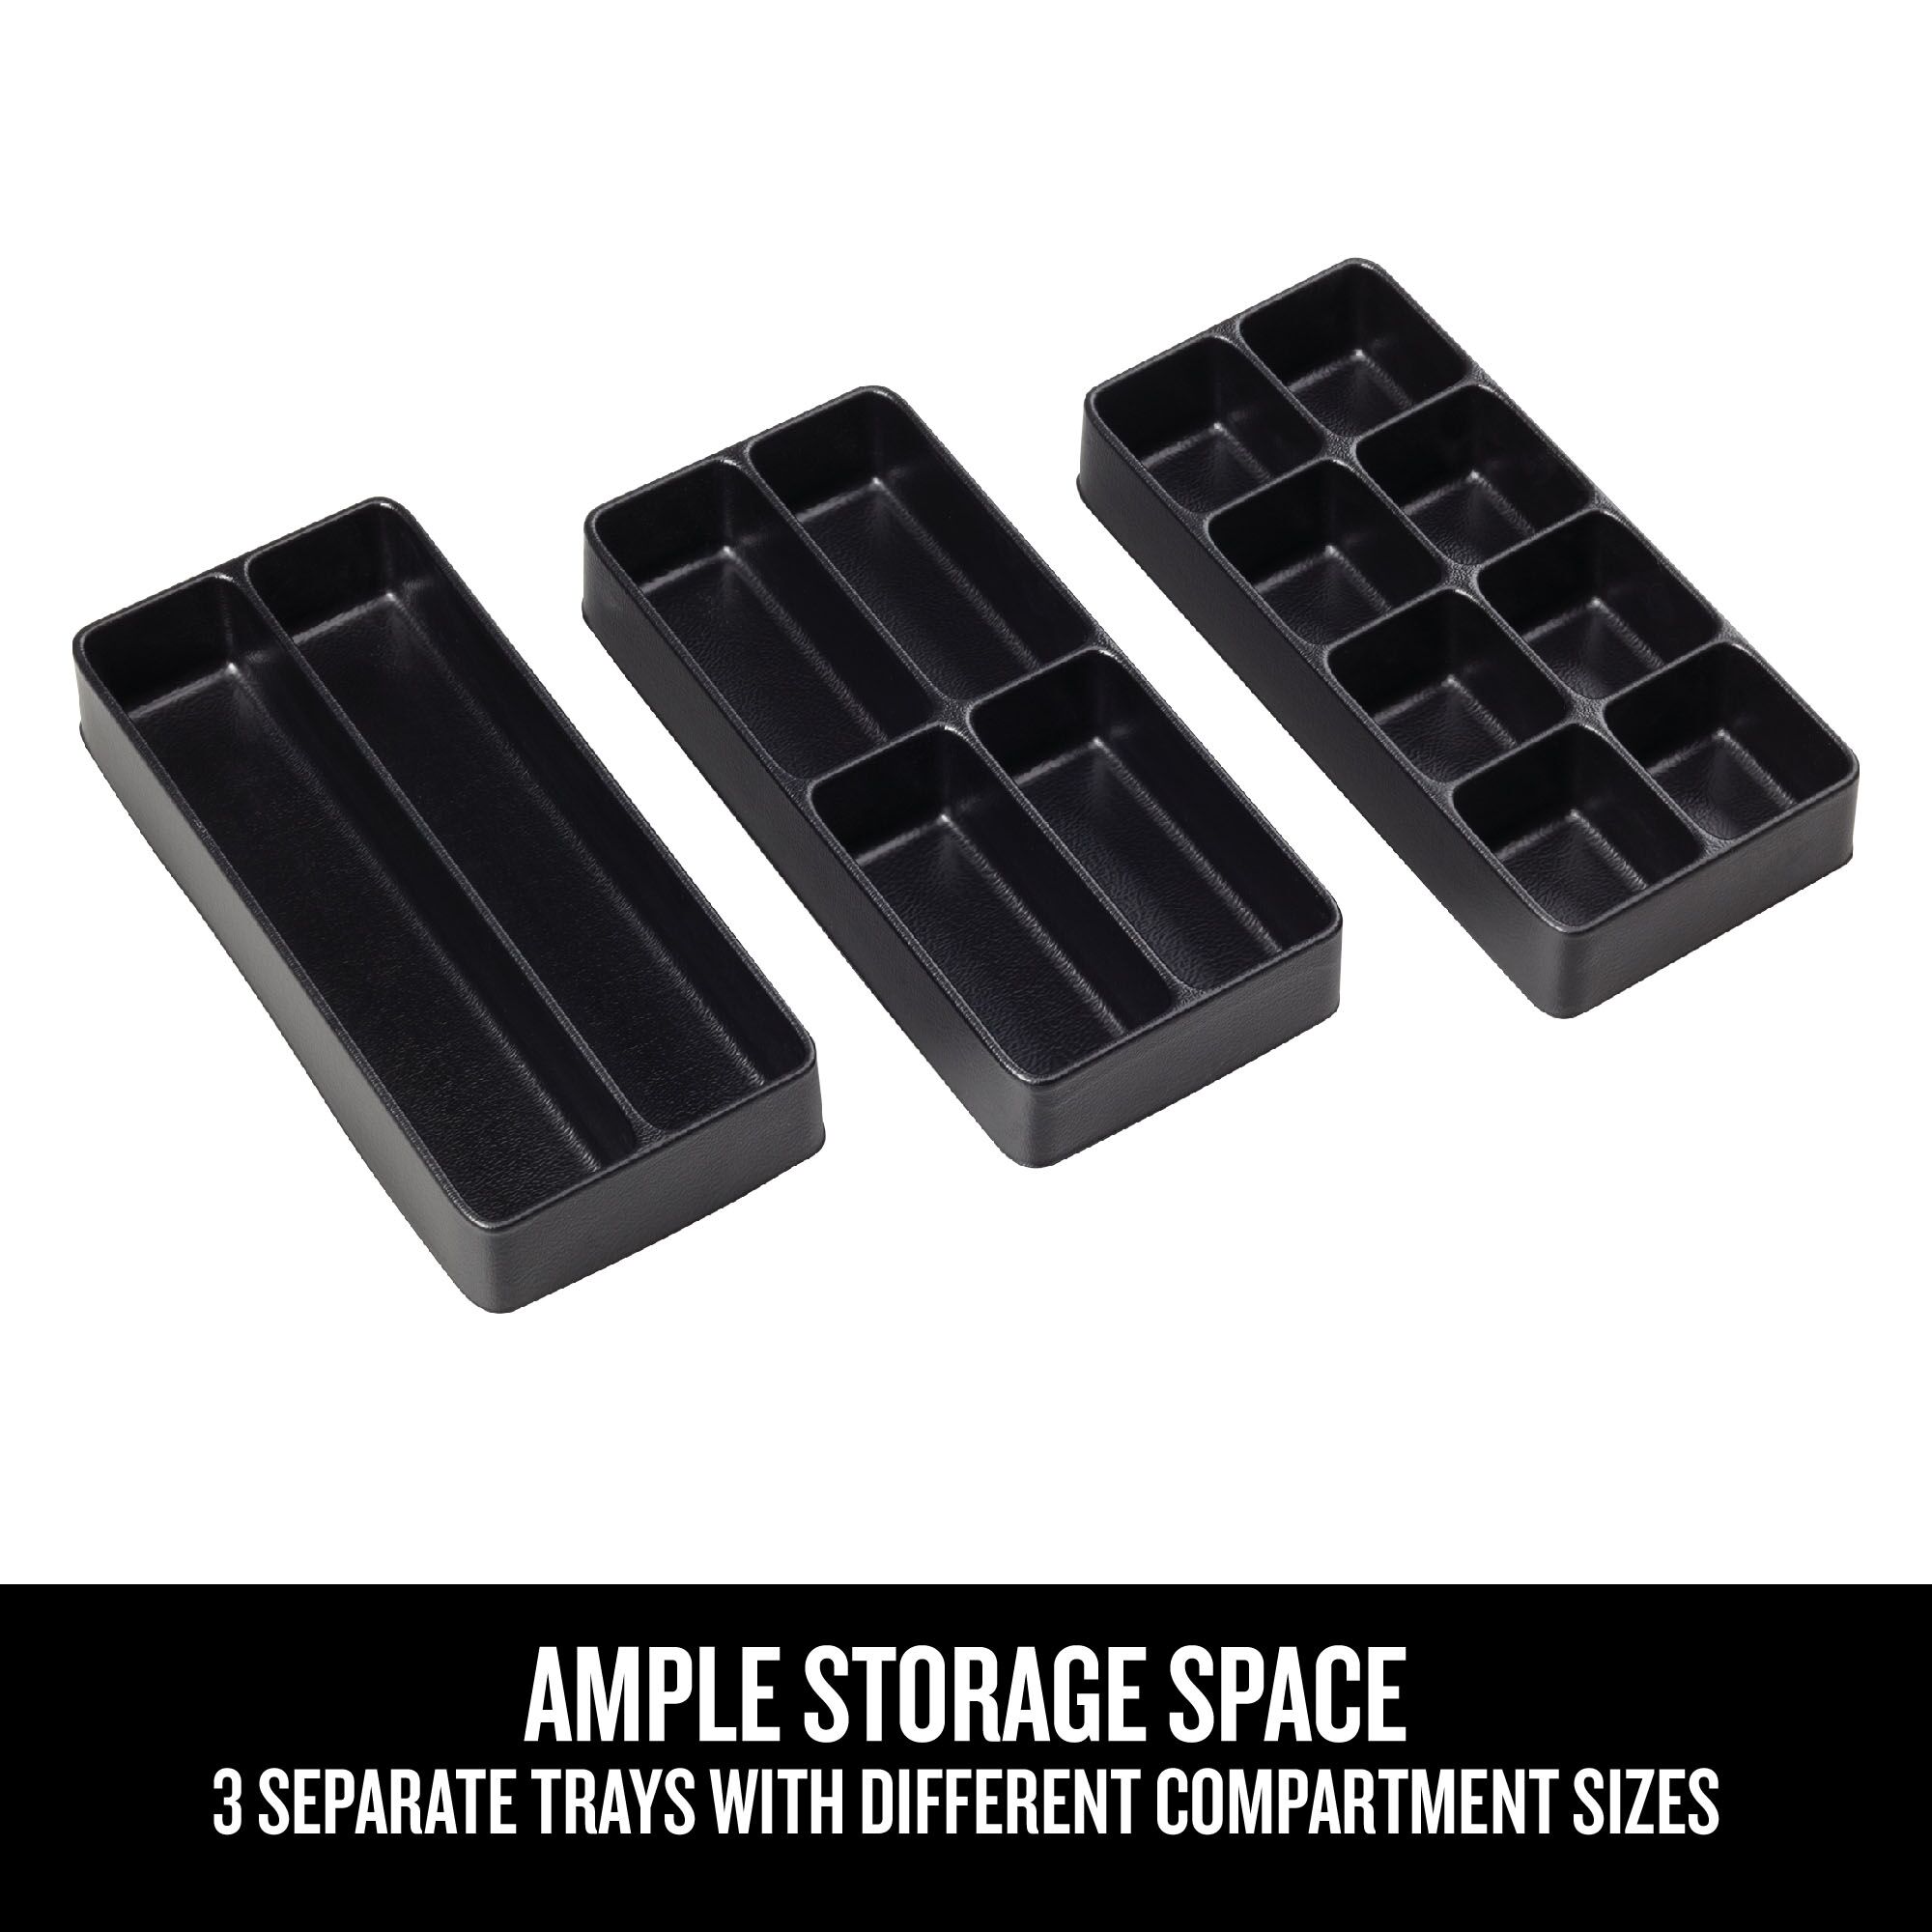 Ample storage space - three separate trays with different compartment sizes